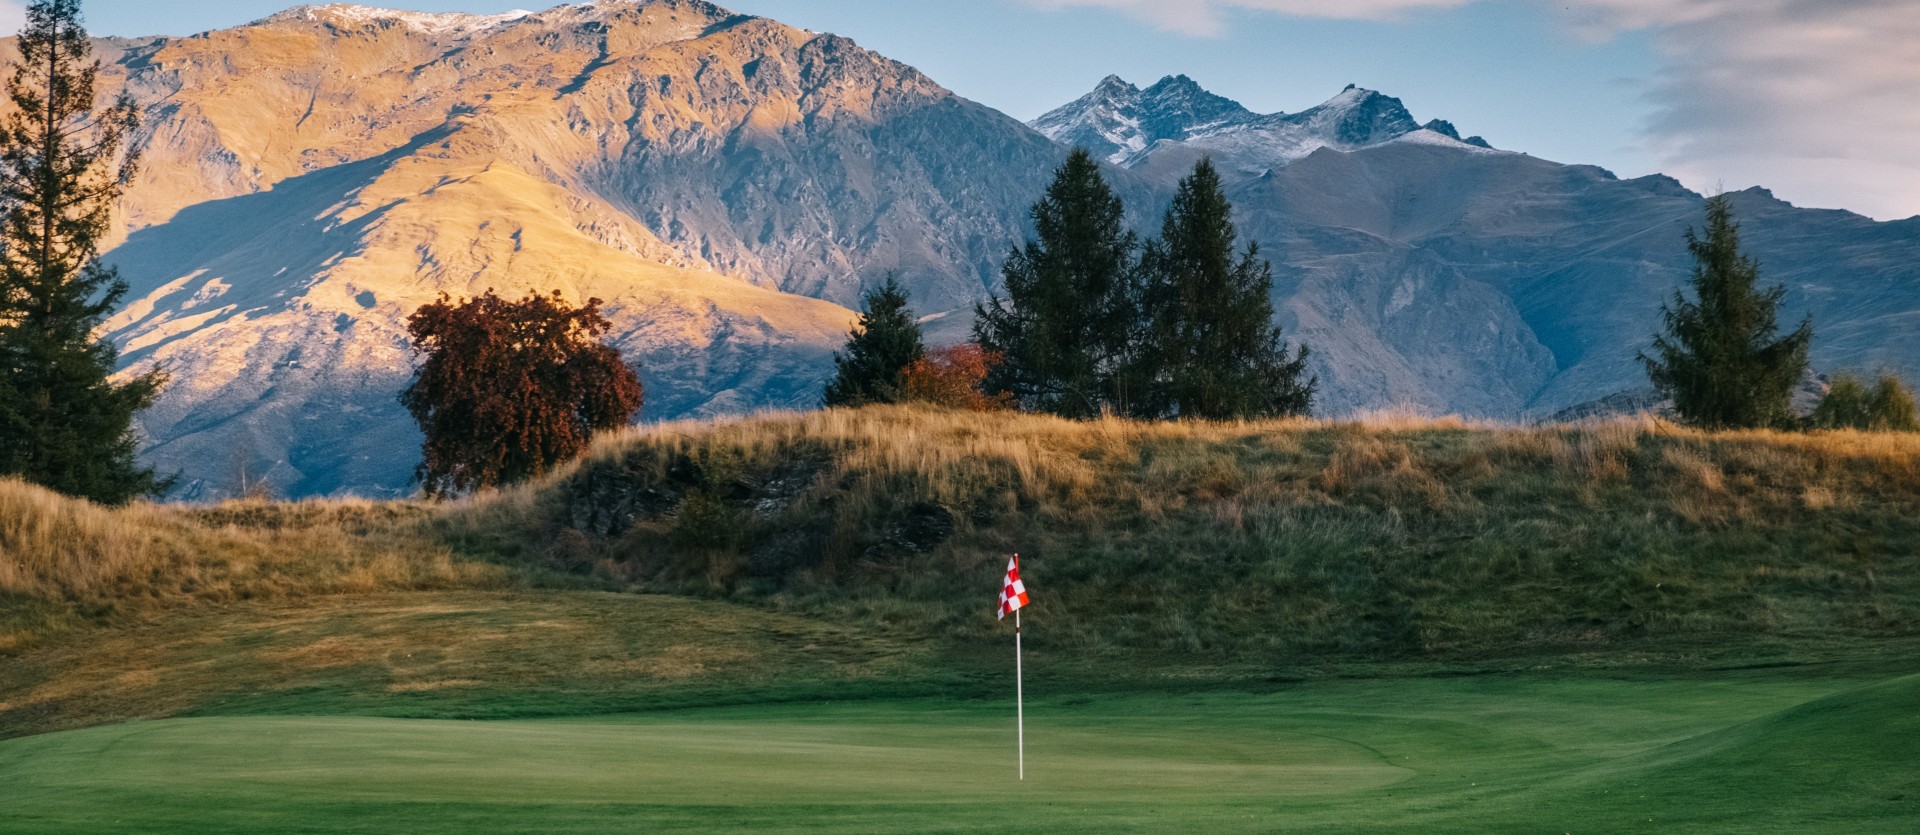 Playing golf in Queenstown?